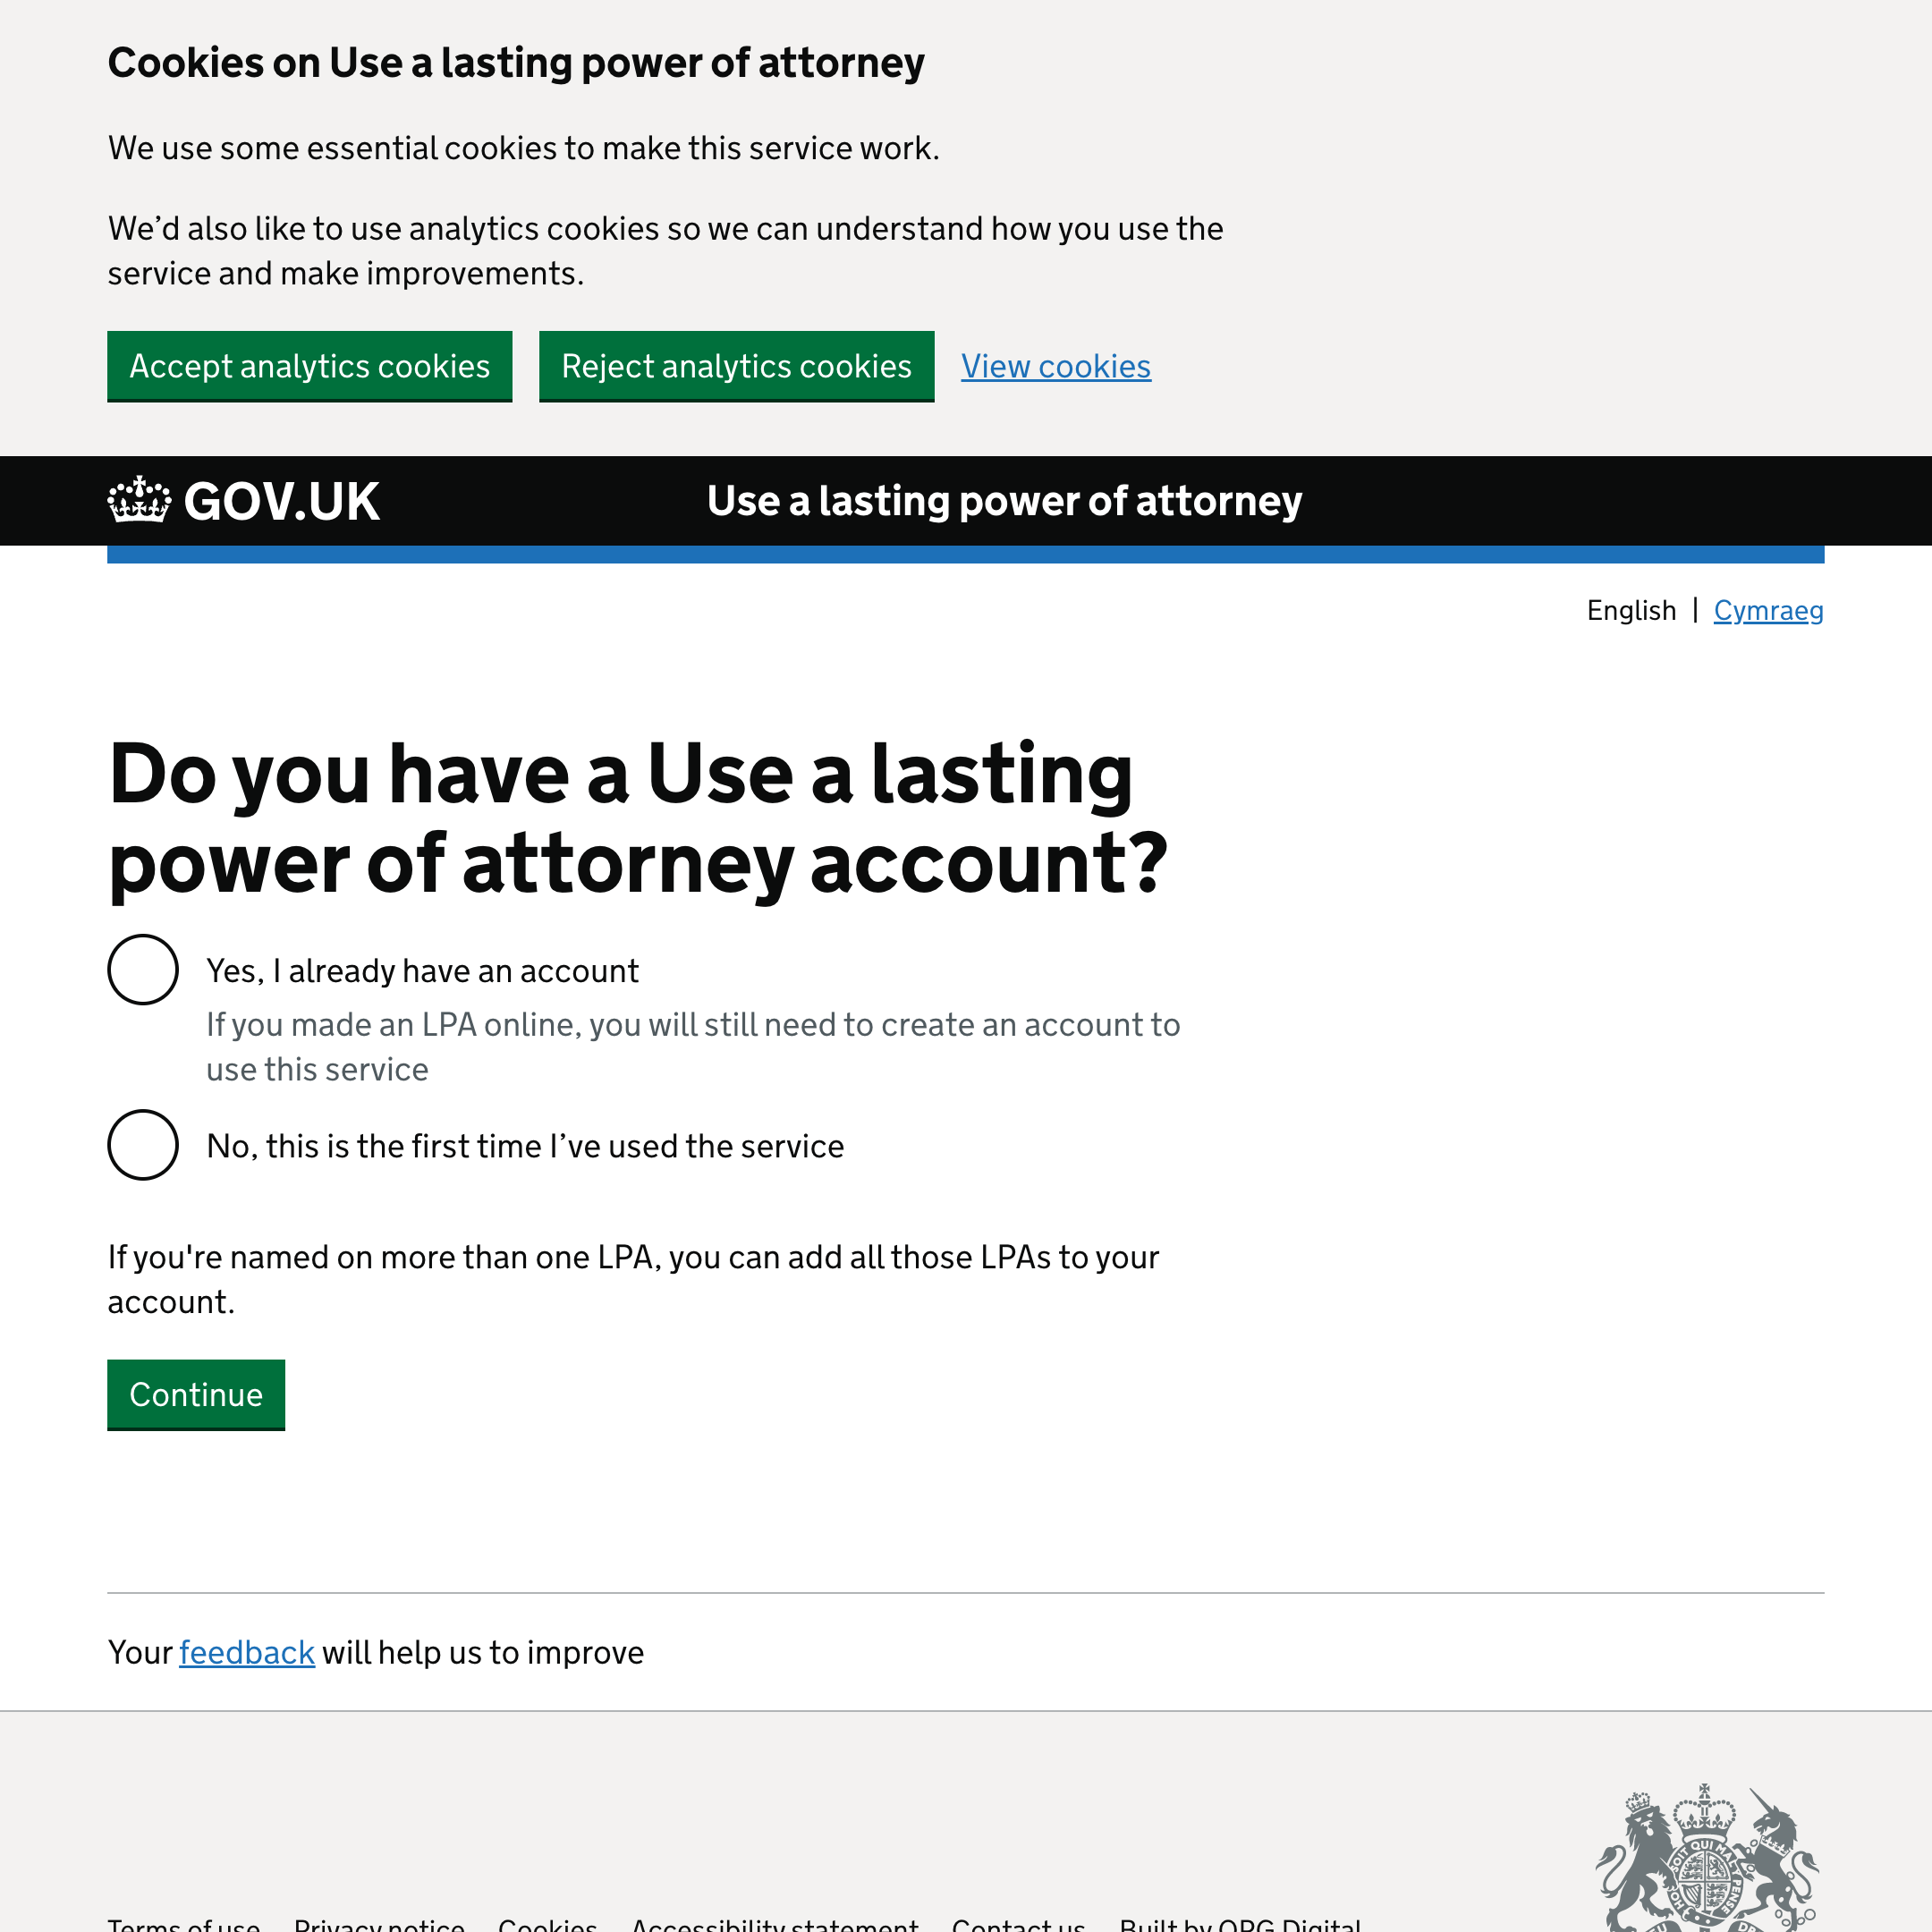 Use a lasting power of attorney